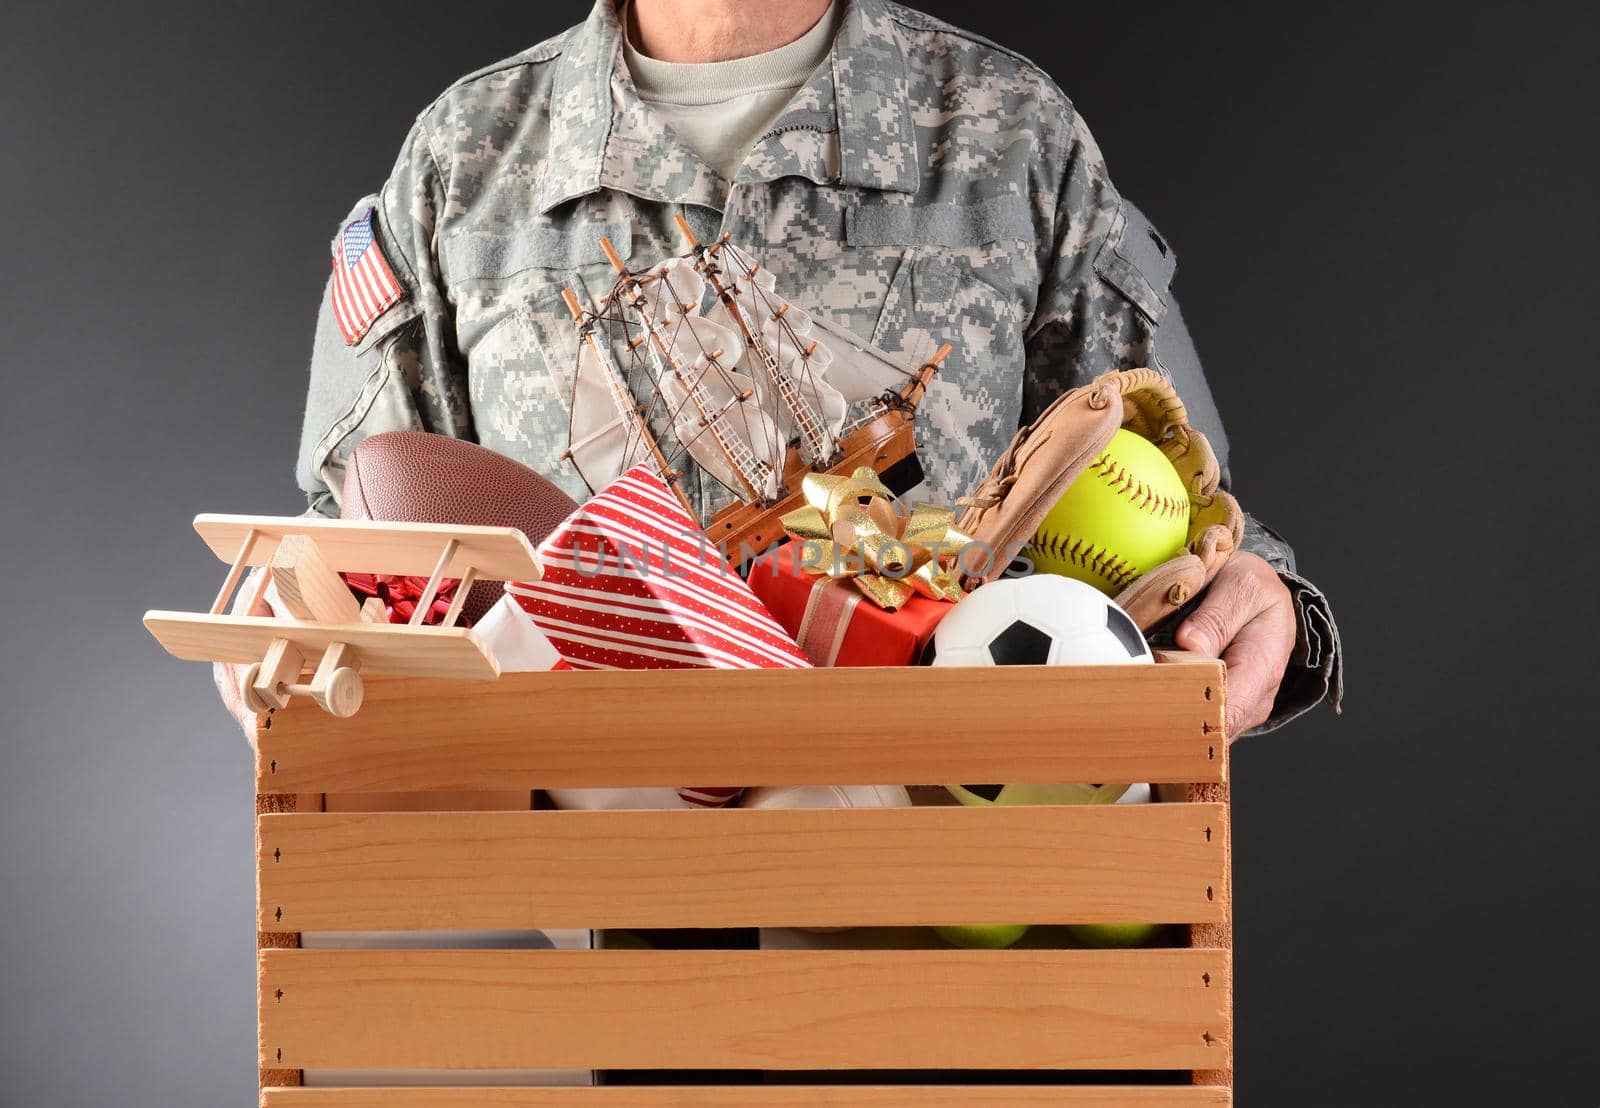 Closeup of a soldier in fatigues holding a wooden box full of toys and sports equipment for a holiday charity drive. Horizontal format man is unrecognizable. 